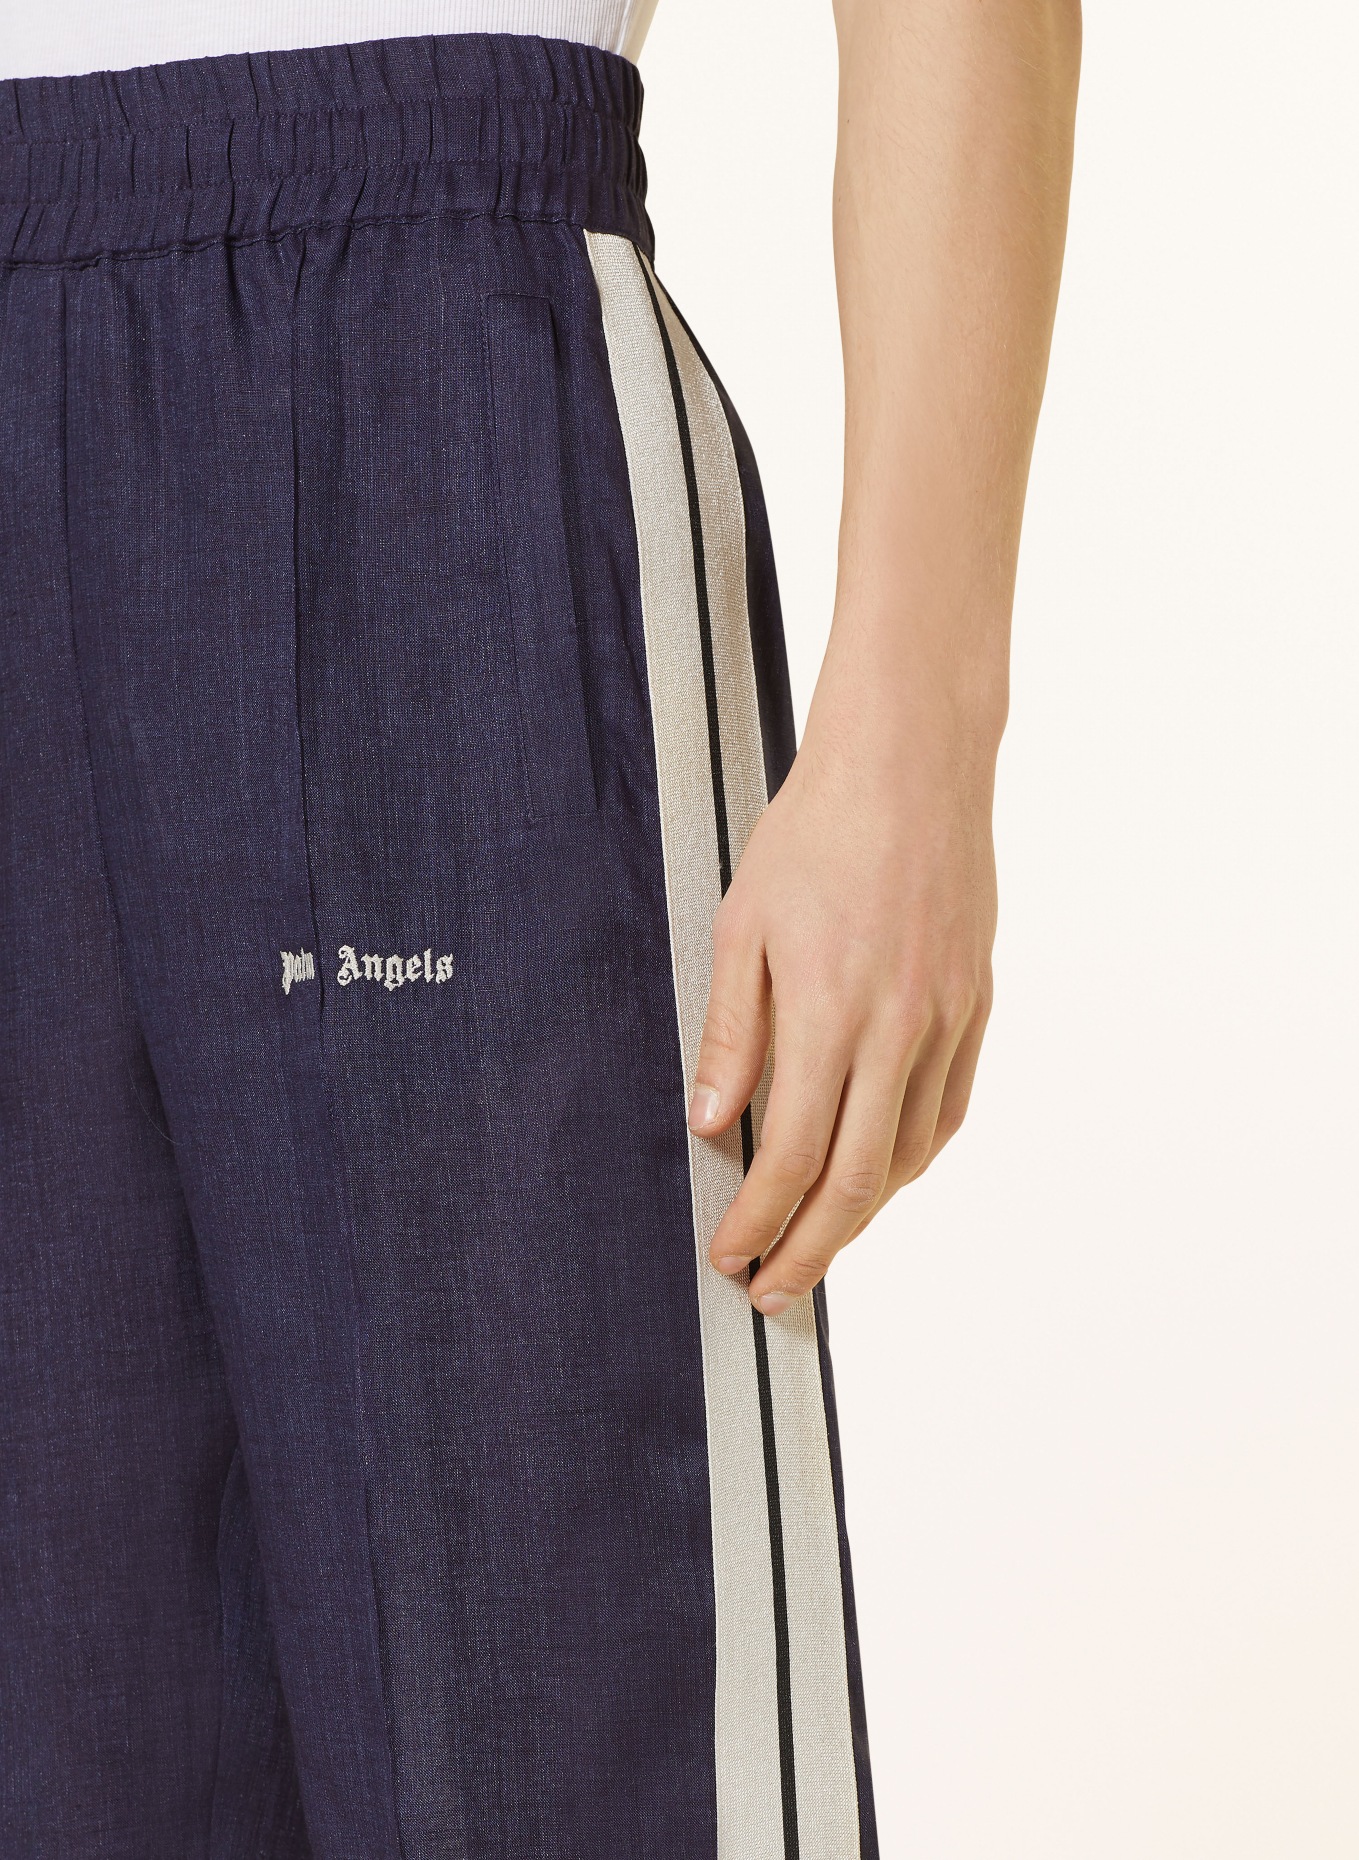 Palm Angels Linen pants in jogger style, Color: DARK BLUE (Image 5)